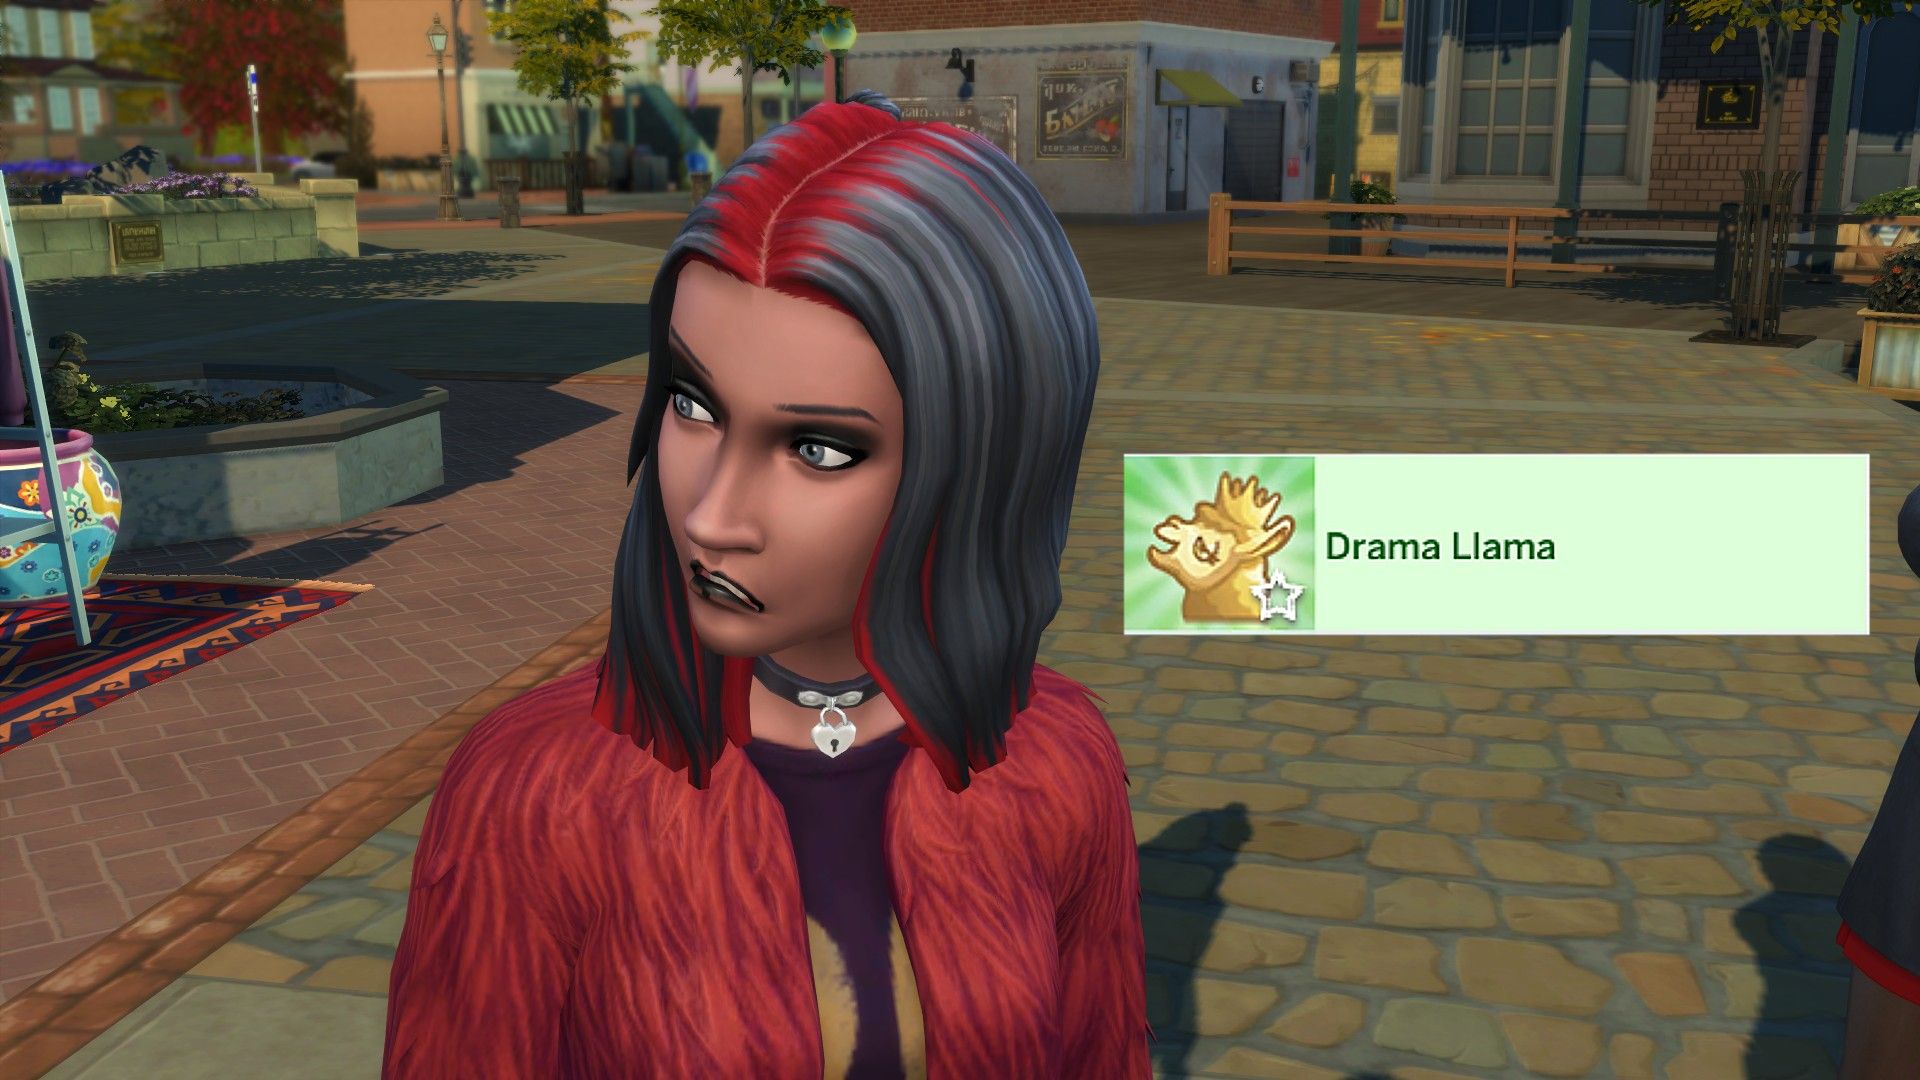 An angry-looking teen from The Sims 4